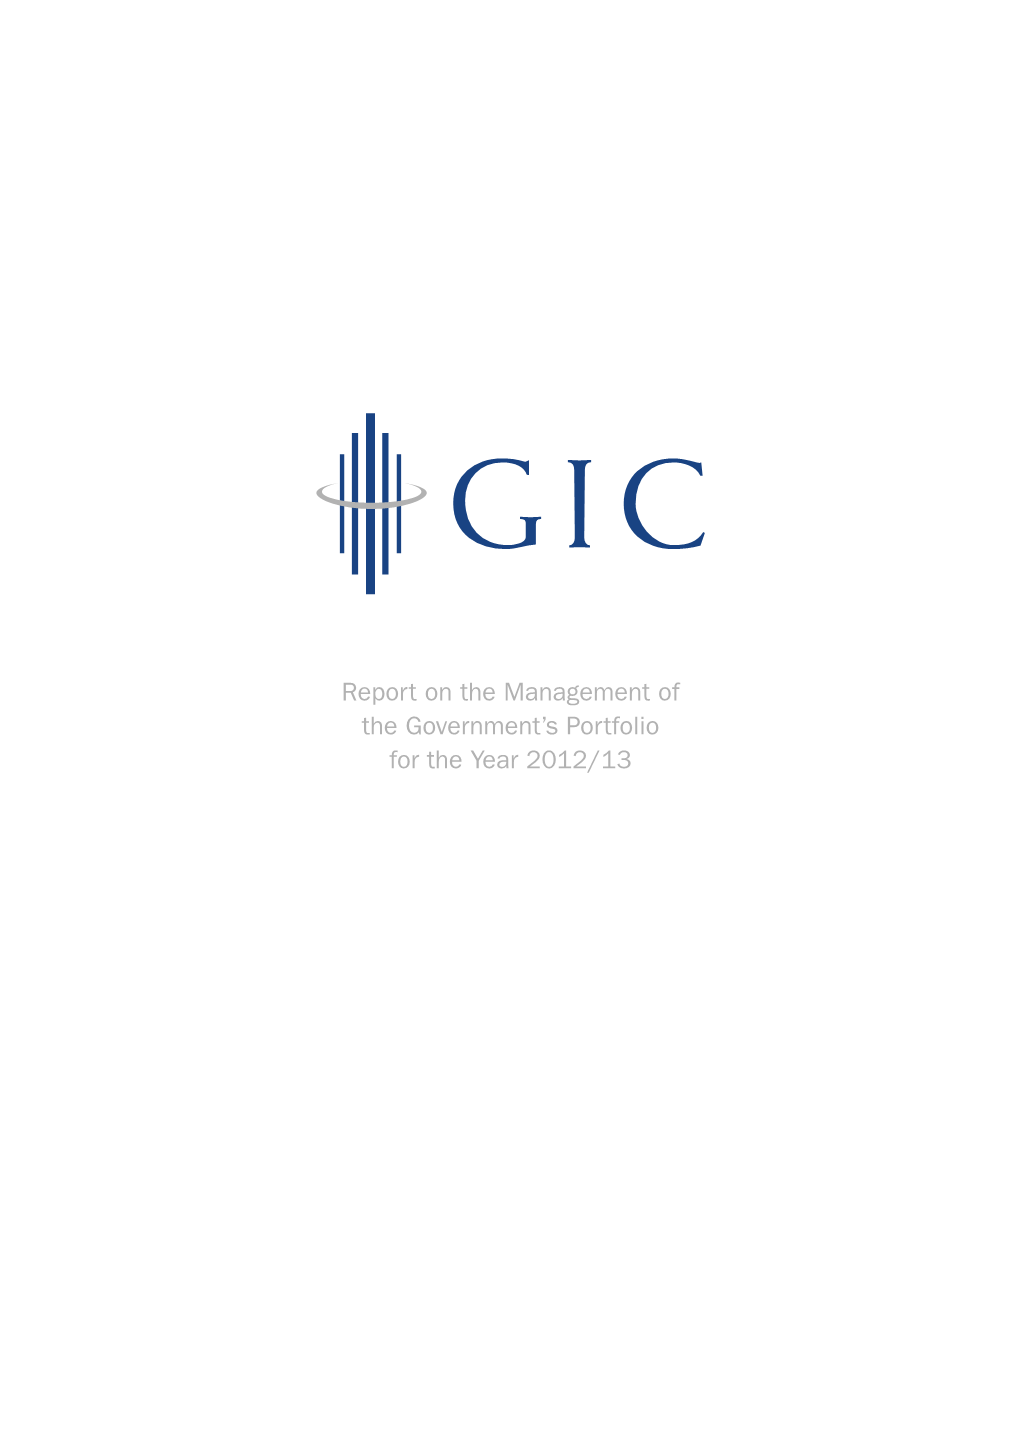 Report on the Management of the Government's Portfolio for the Year